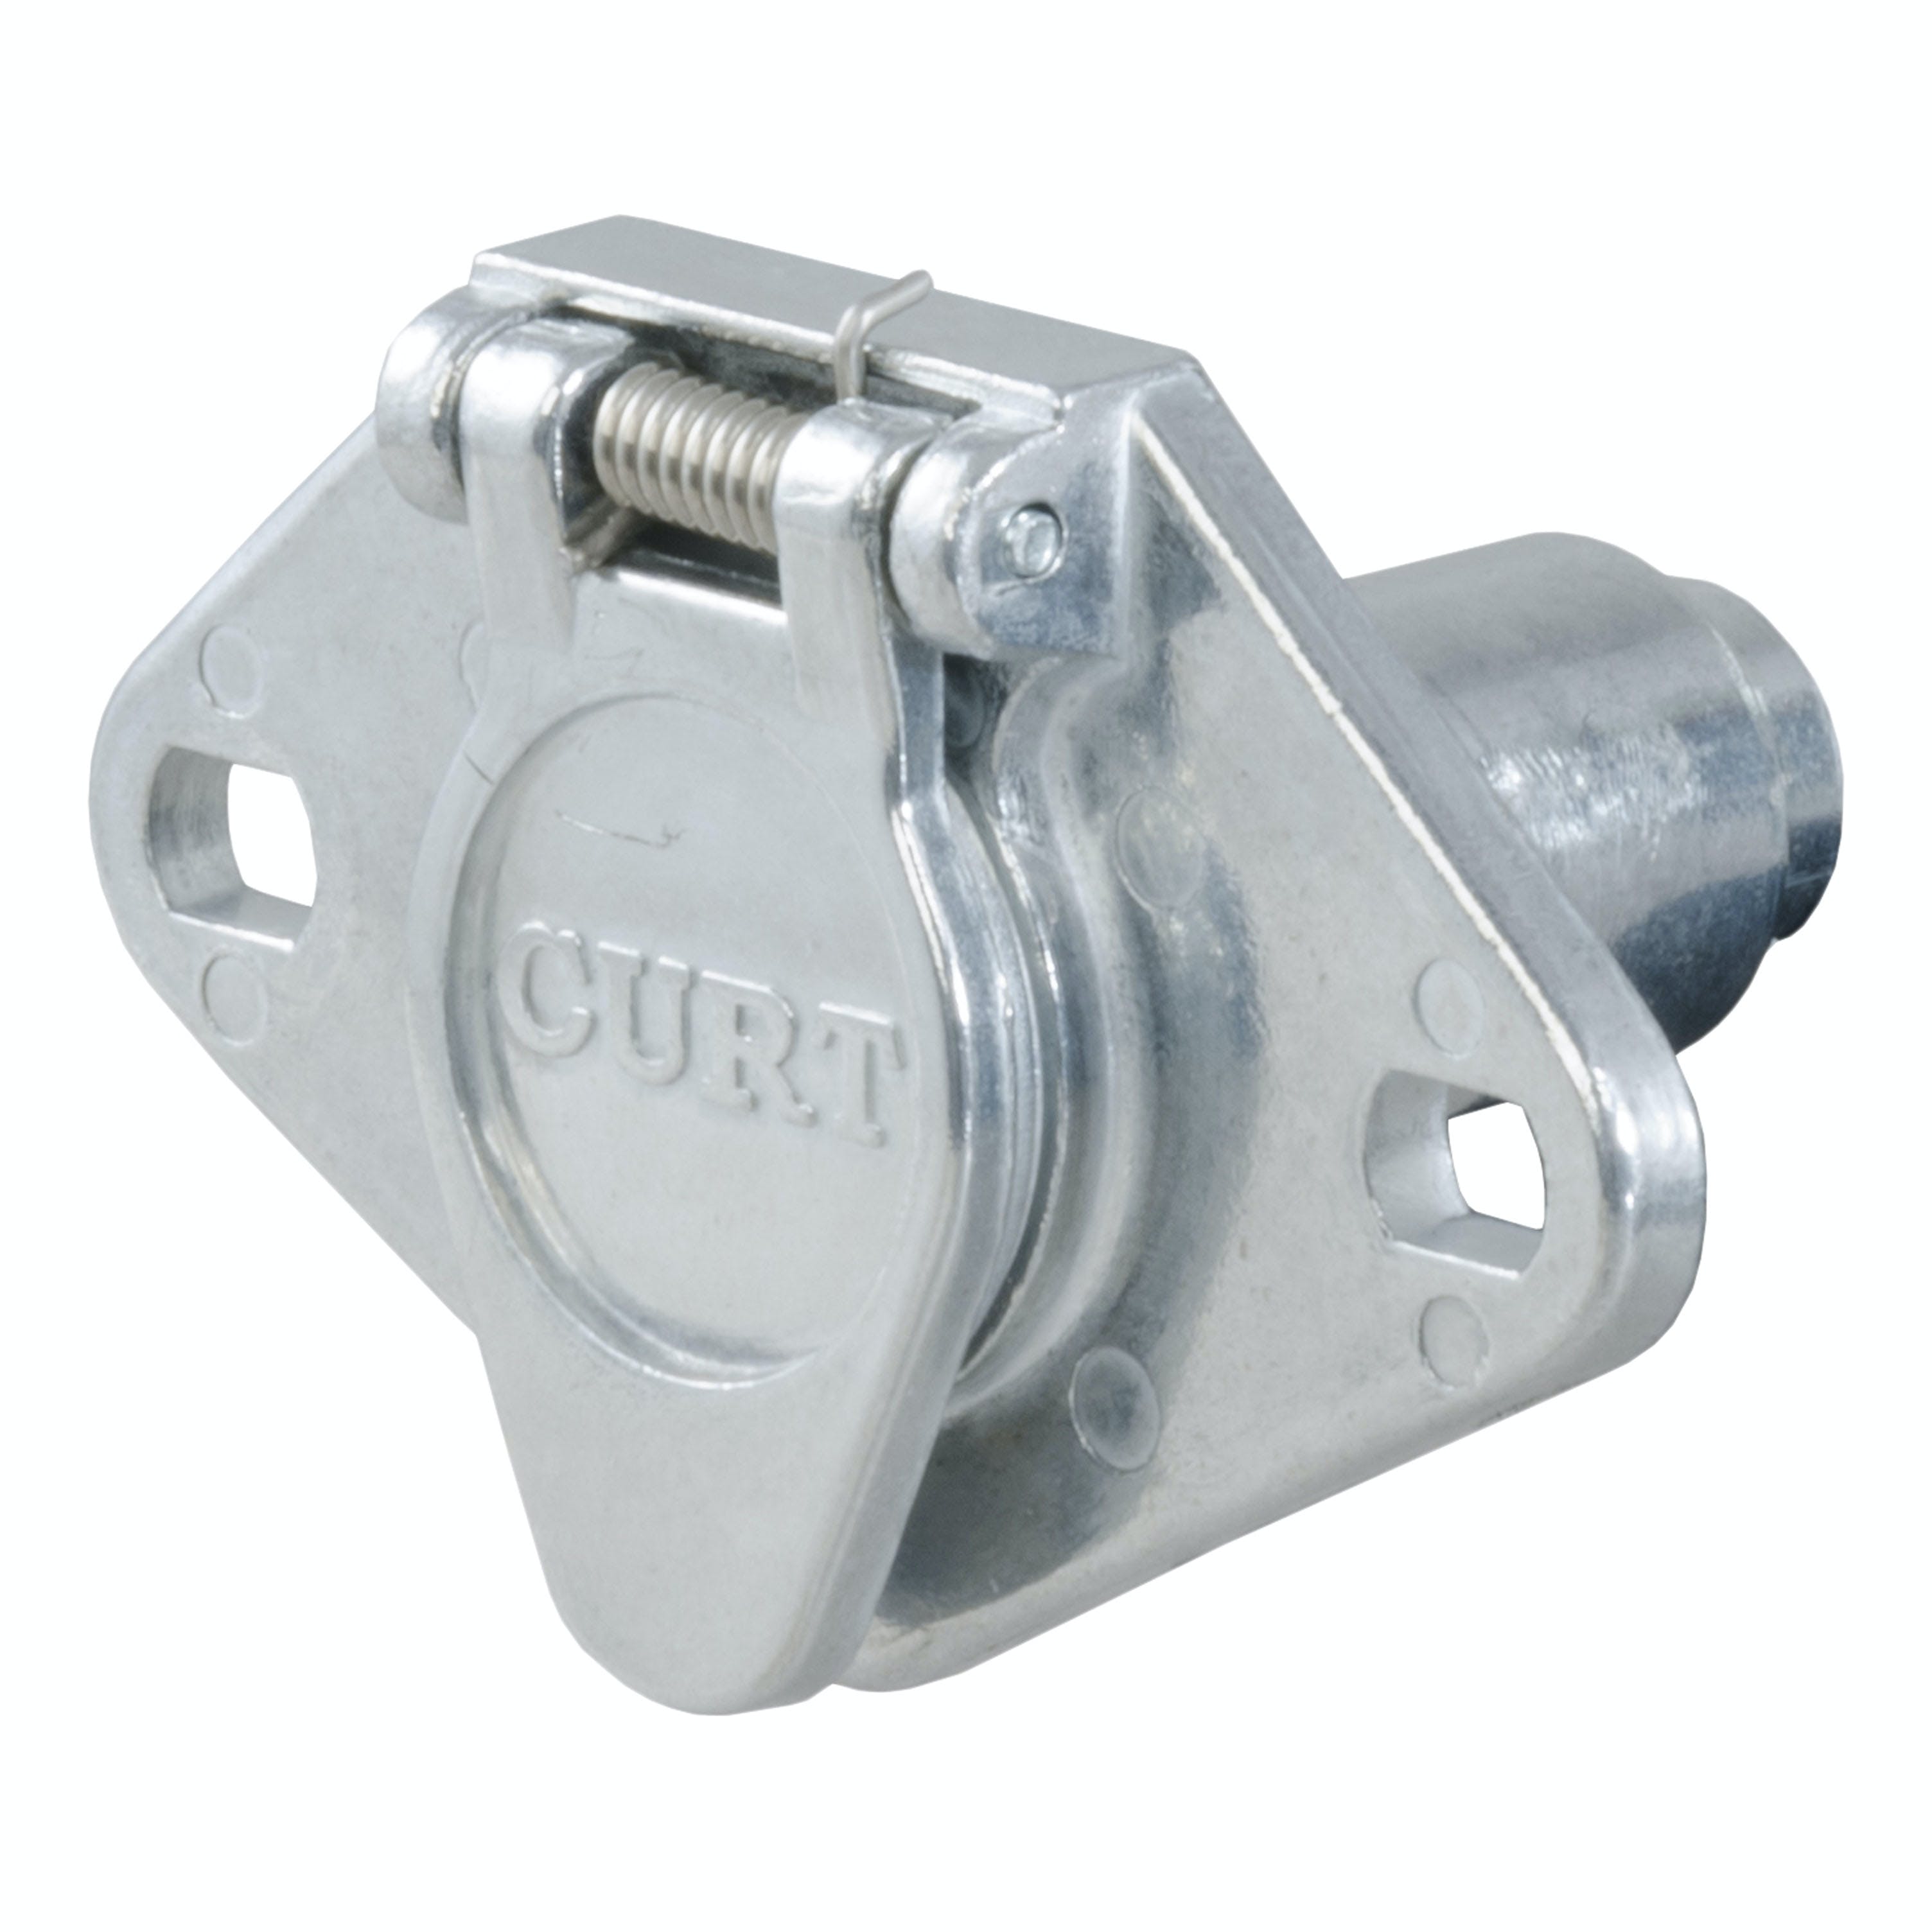 CURT 58070 4-Way Round Connector Socket (Vehicle Side)